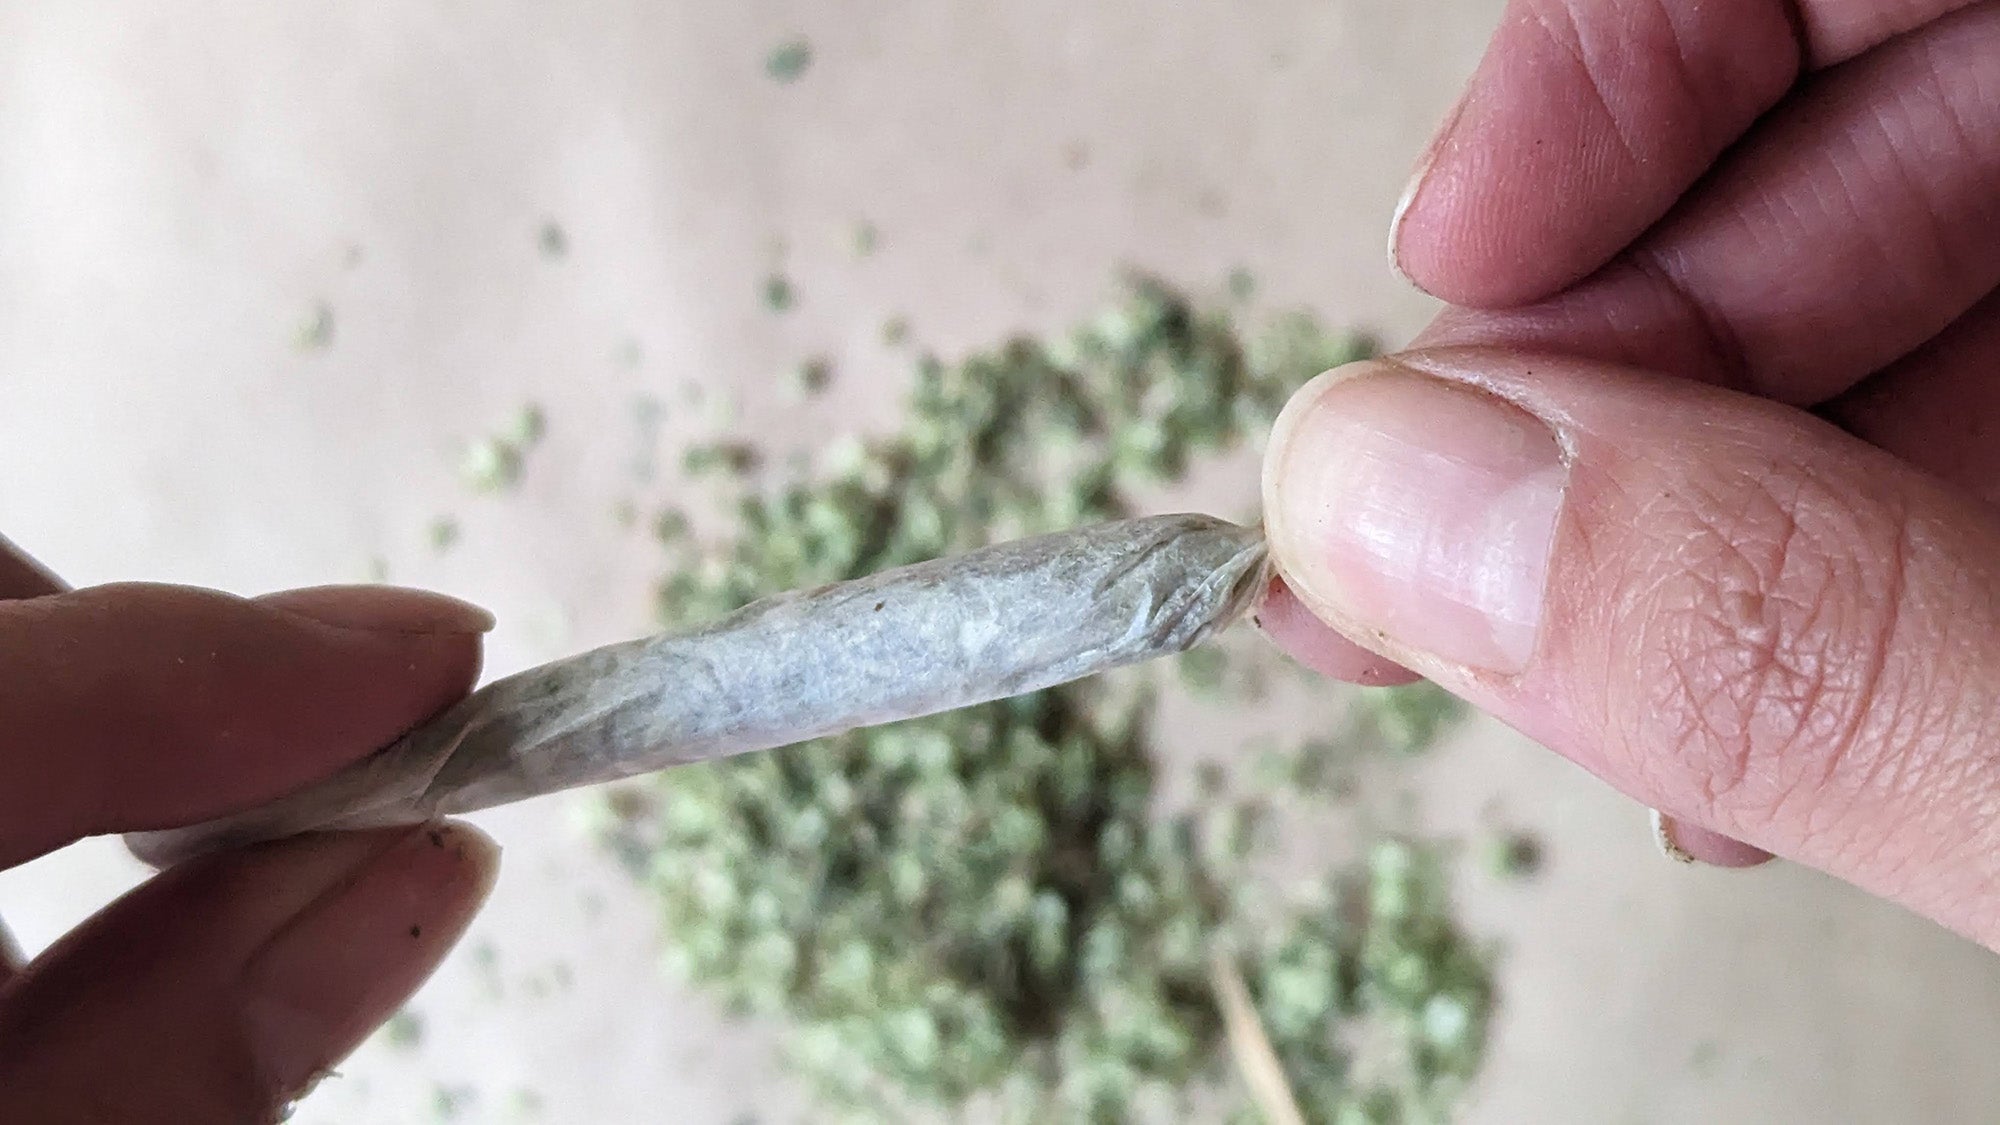 Hand holding a joint while the other twists the tip. 